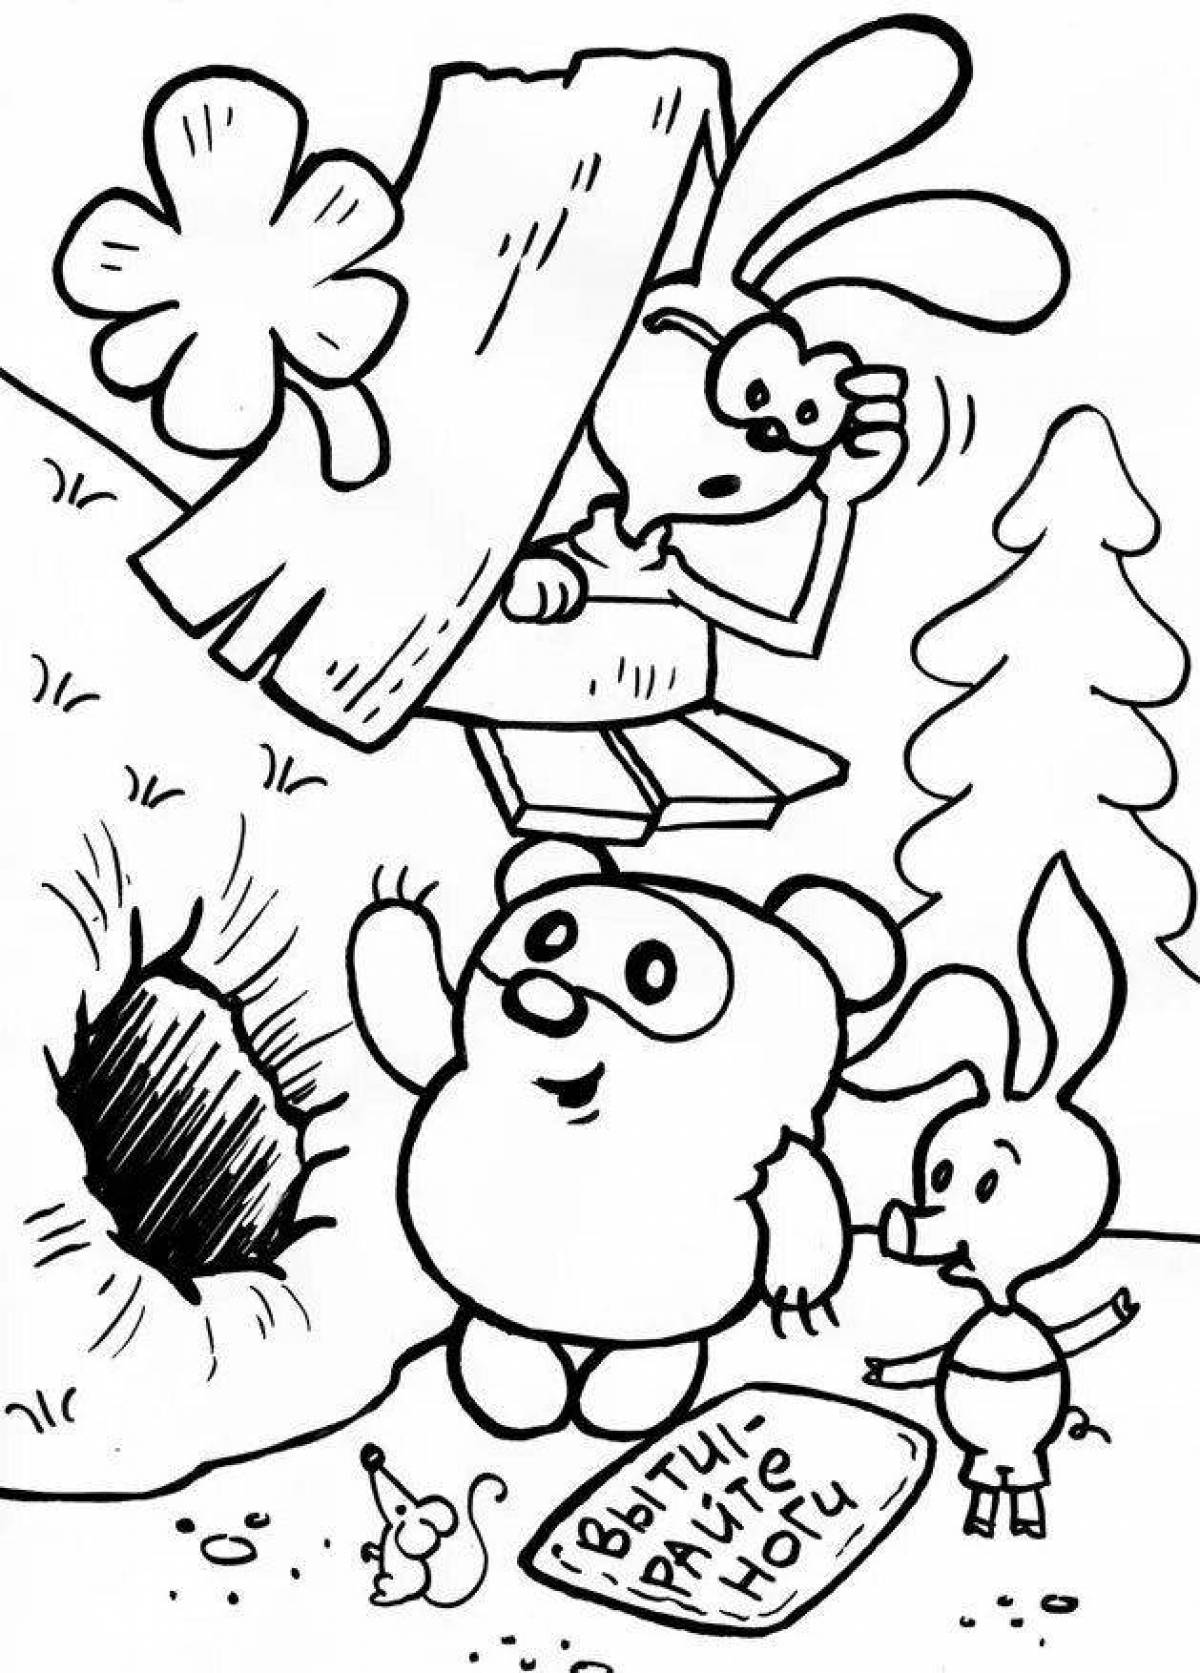 Animated winnie the pooh soviet coloring book